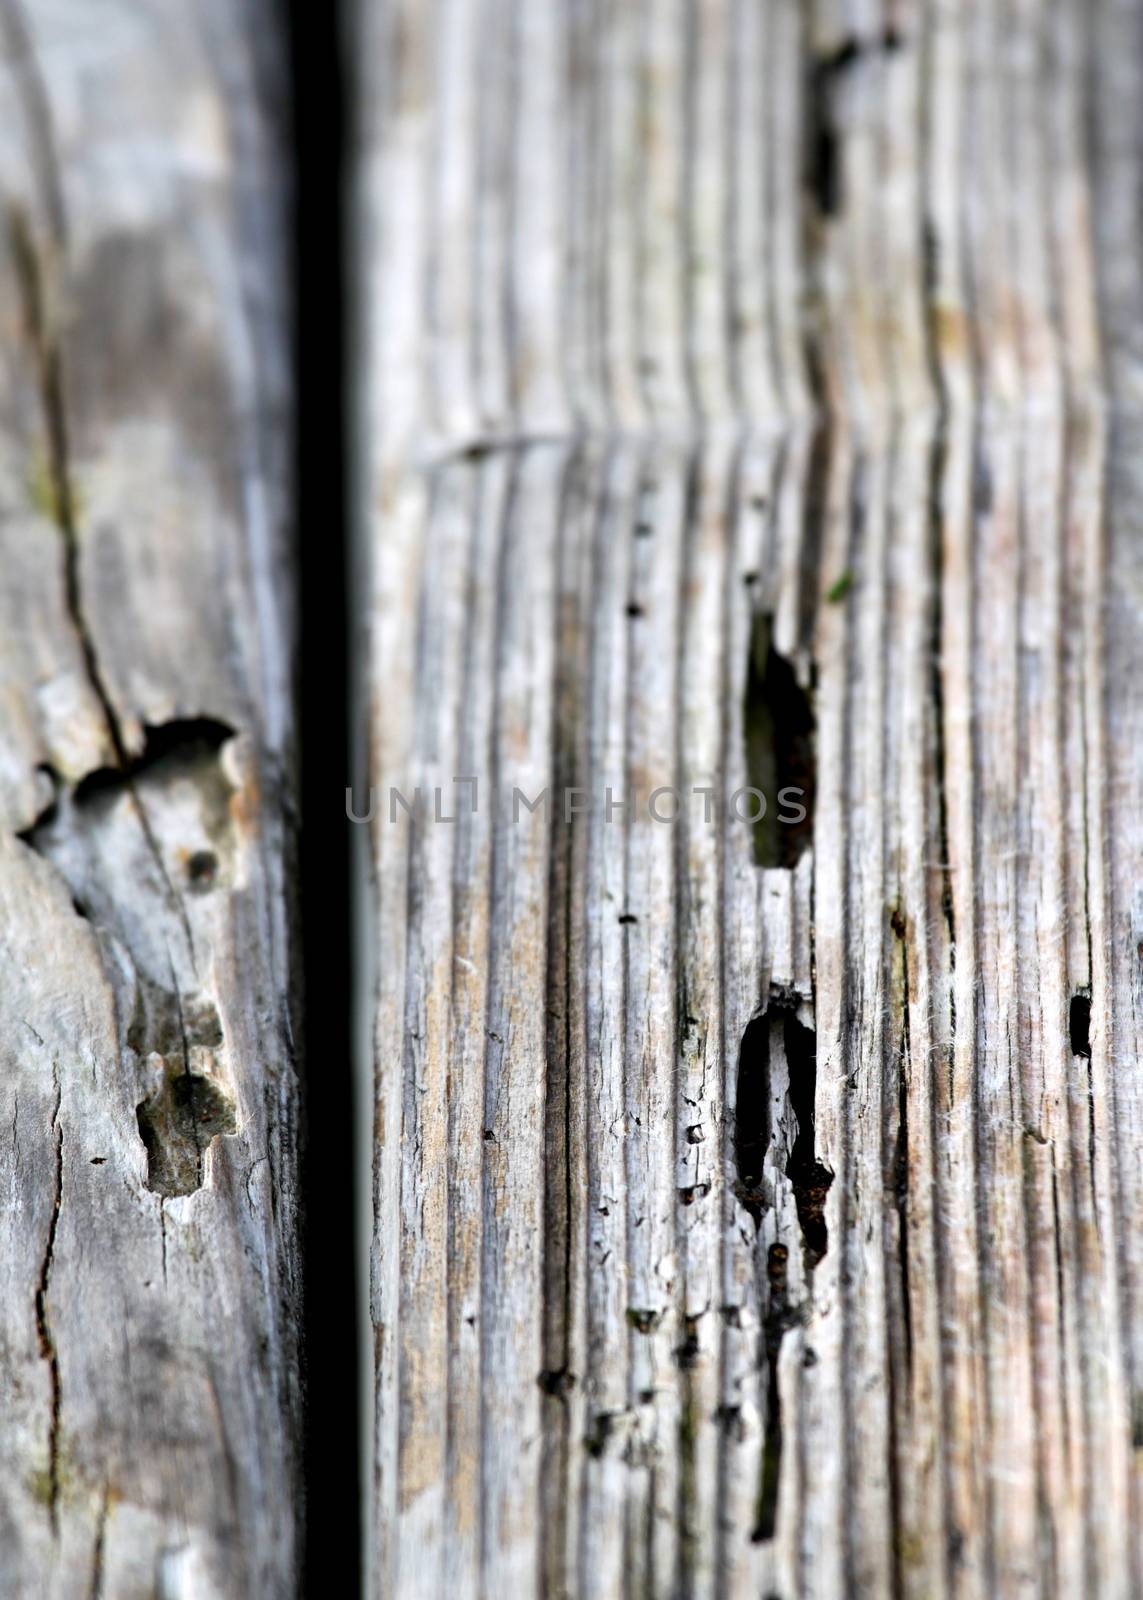 Texture of old wood with many termites holes.